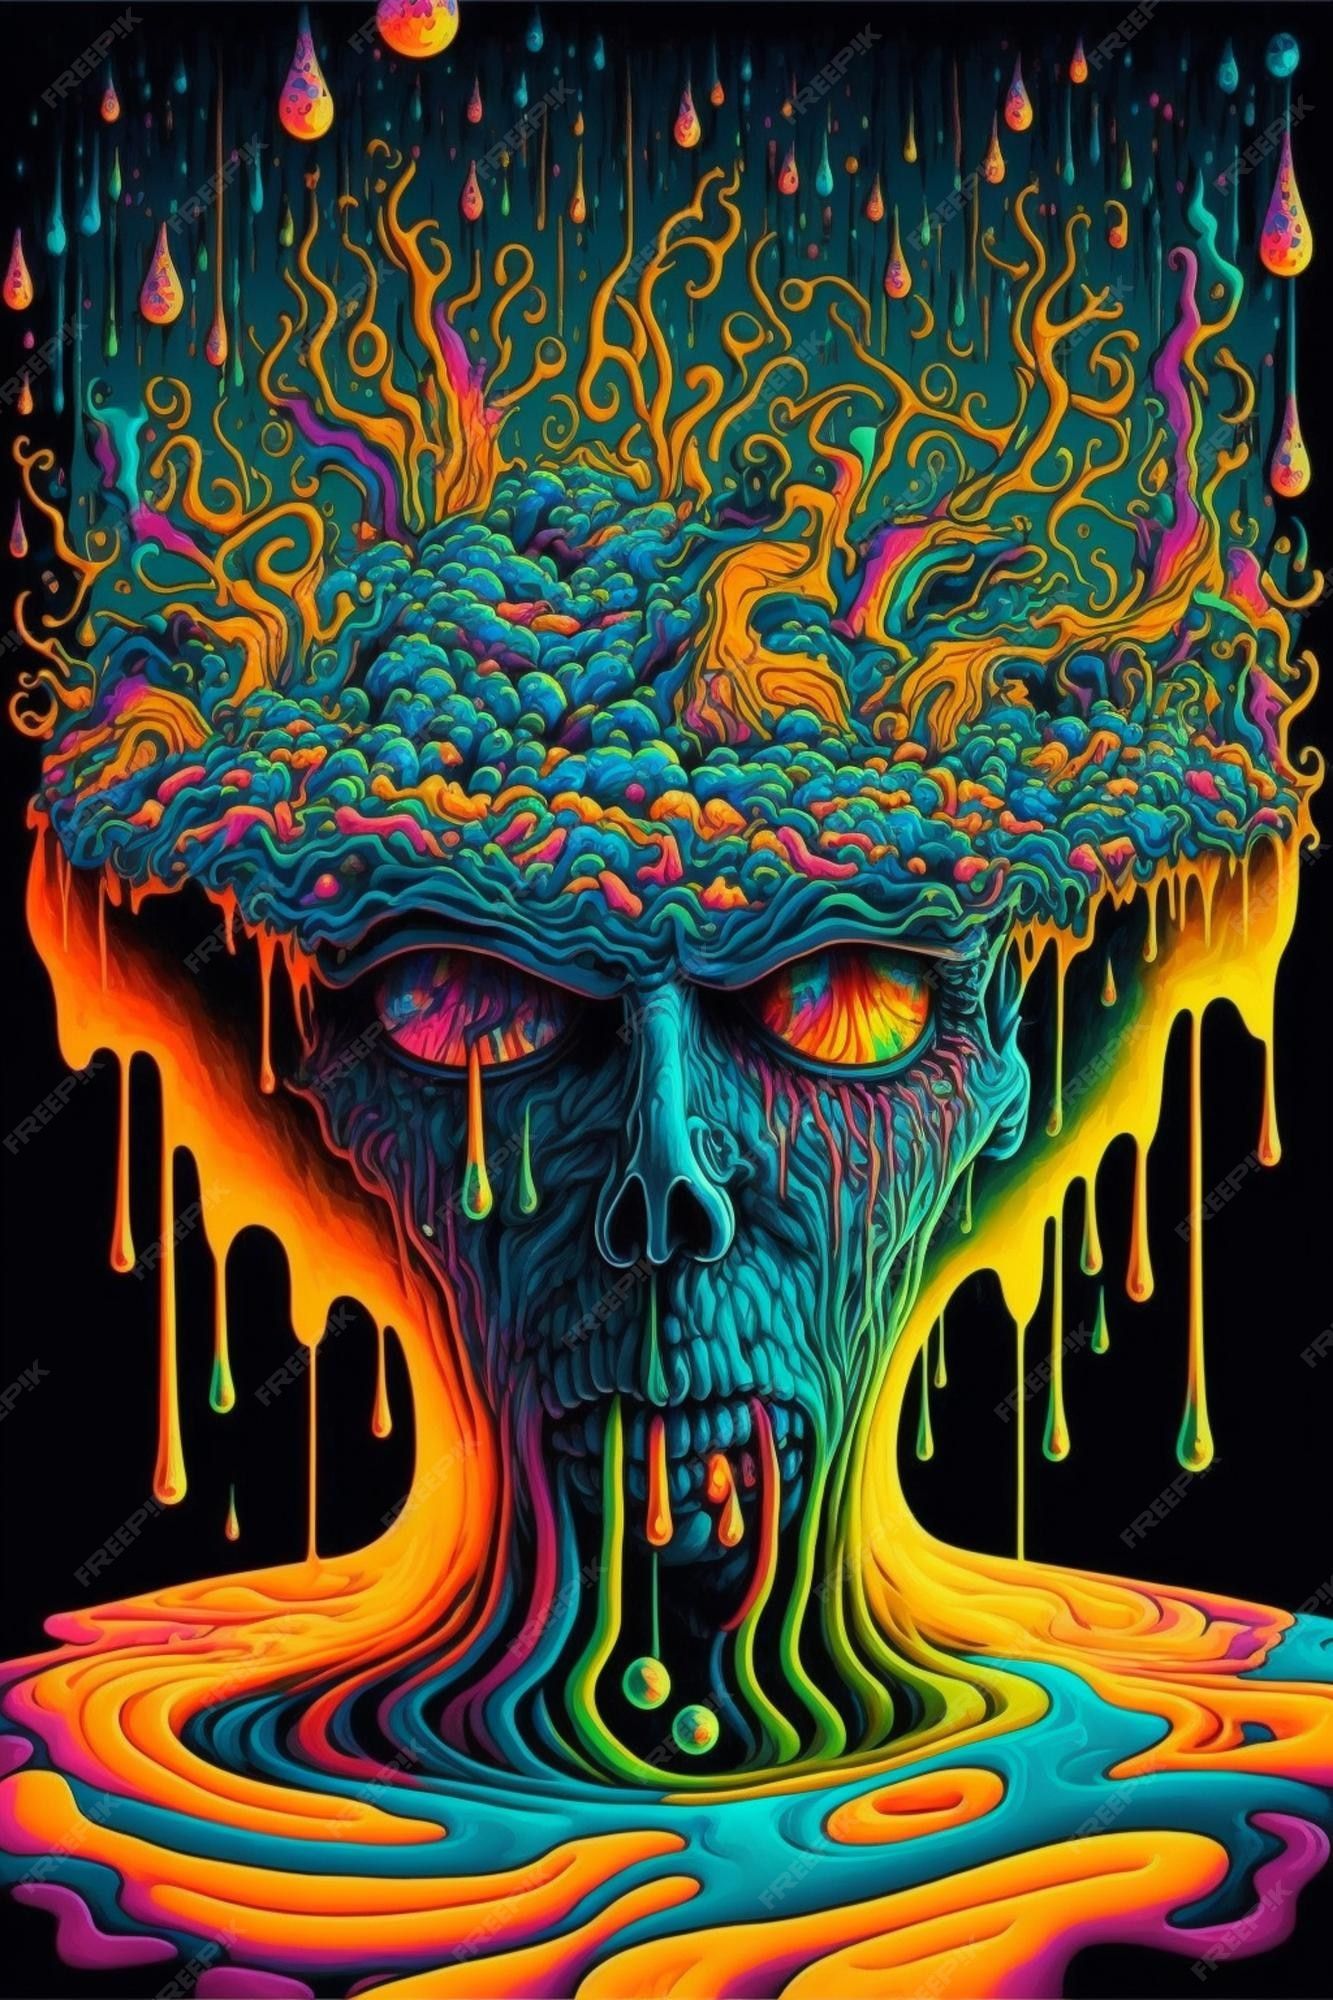 A psychedelic poster of an evil looking head with rainbow colors - Psychedelic